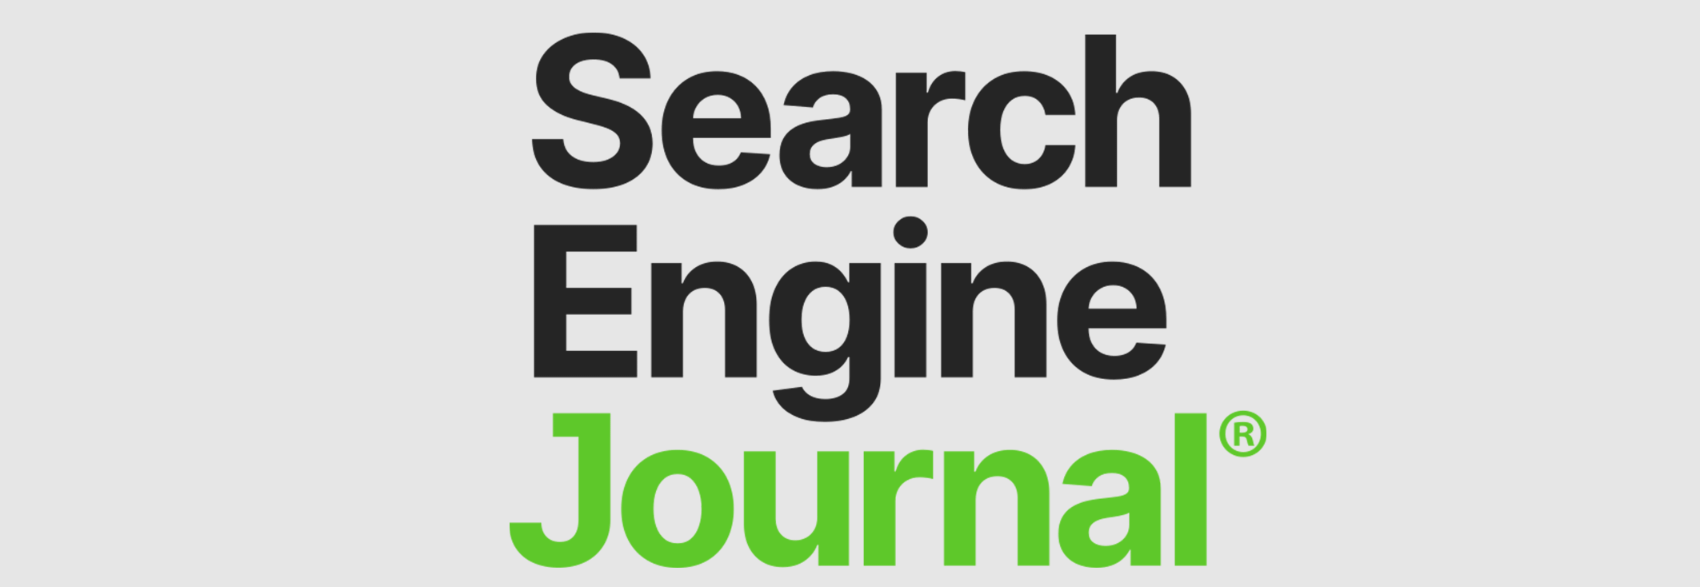 Search Engine Journal is an SEO blog that also covers a lot of other lateral topics.